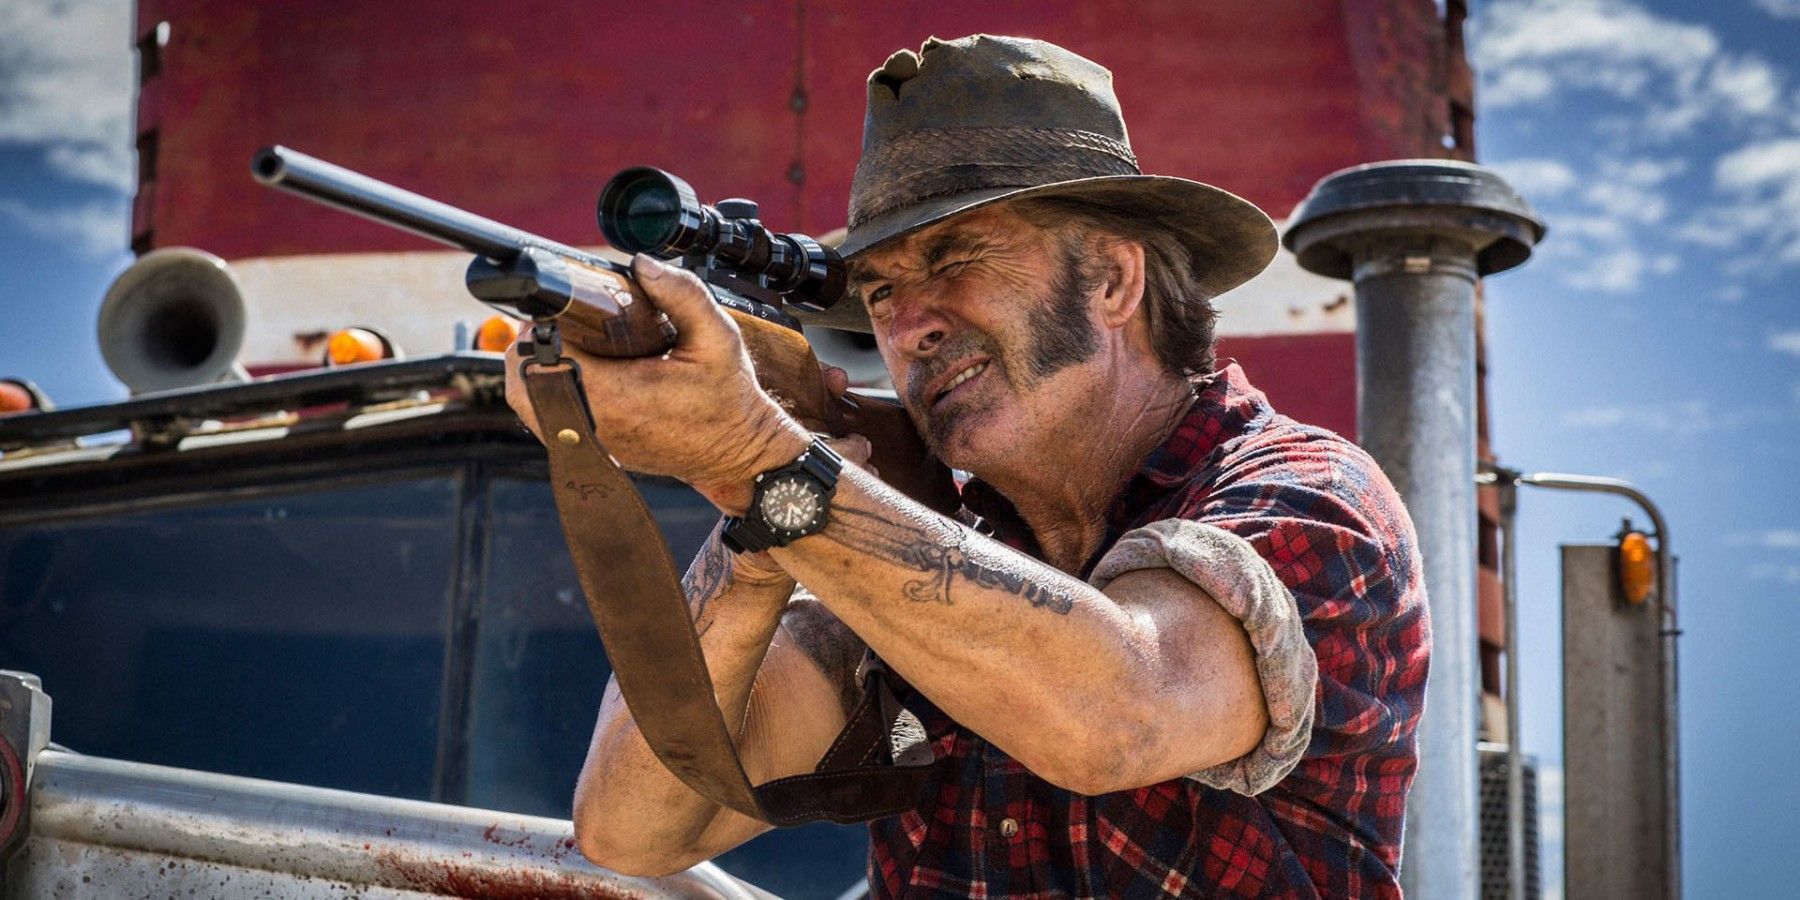 Mick Taylor aiming a rifle in Wolf Creek